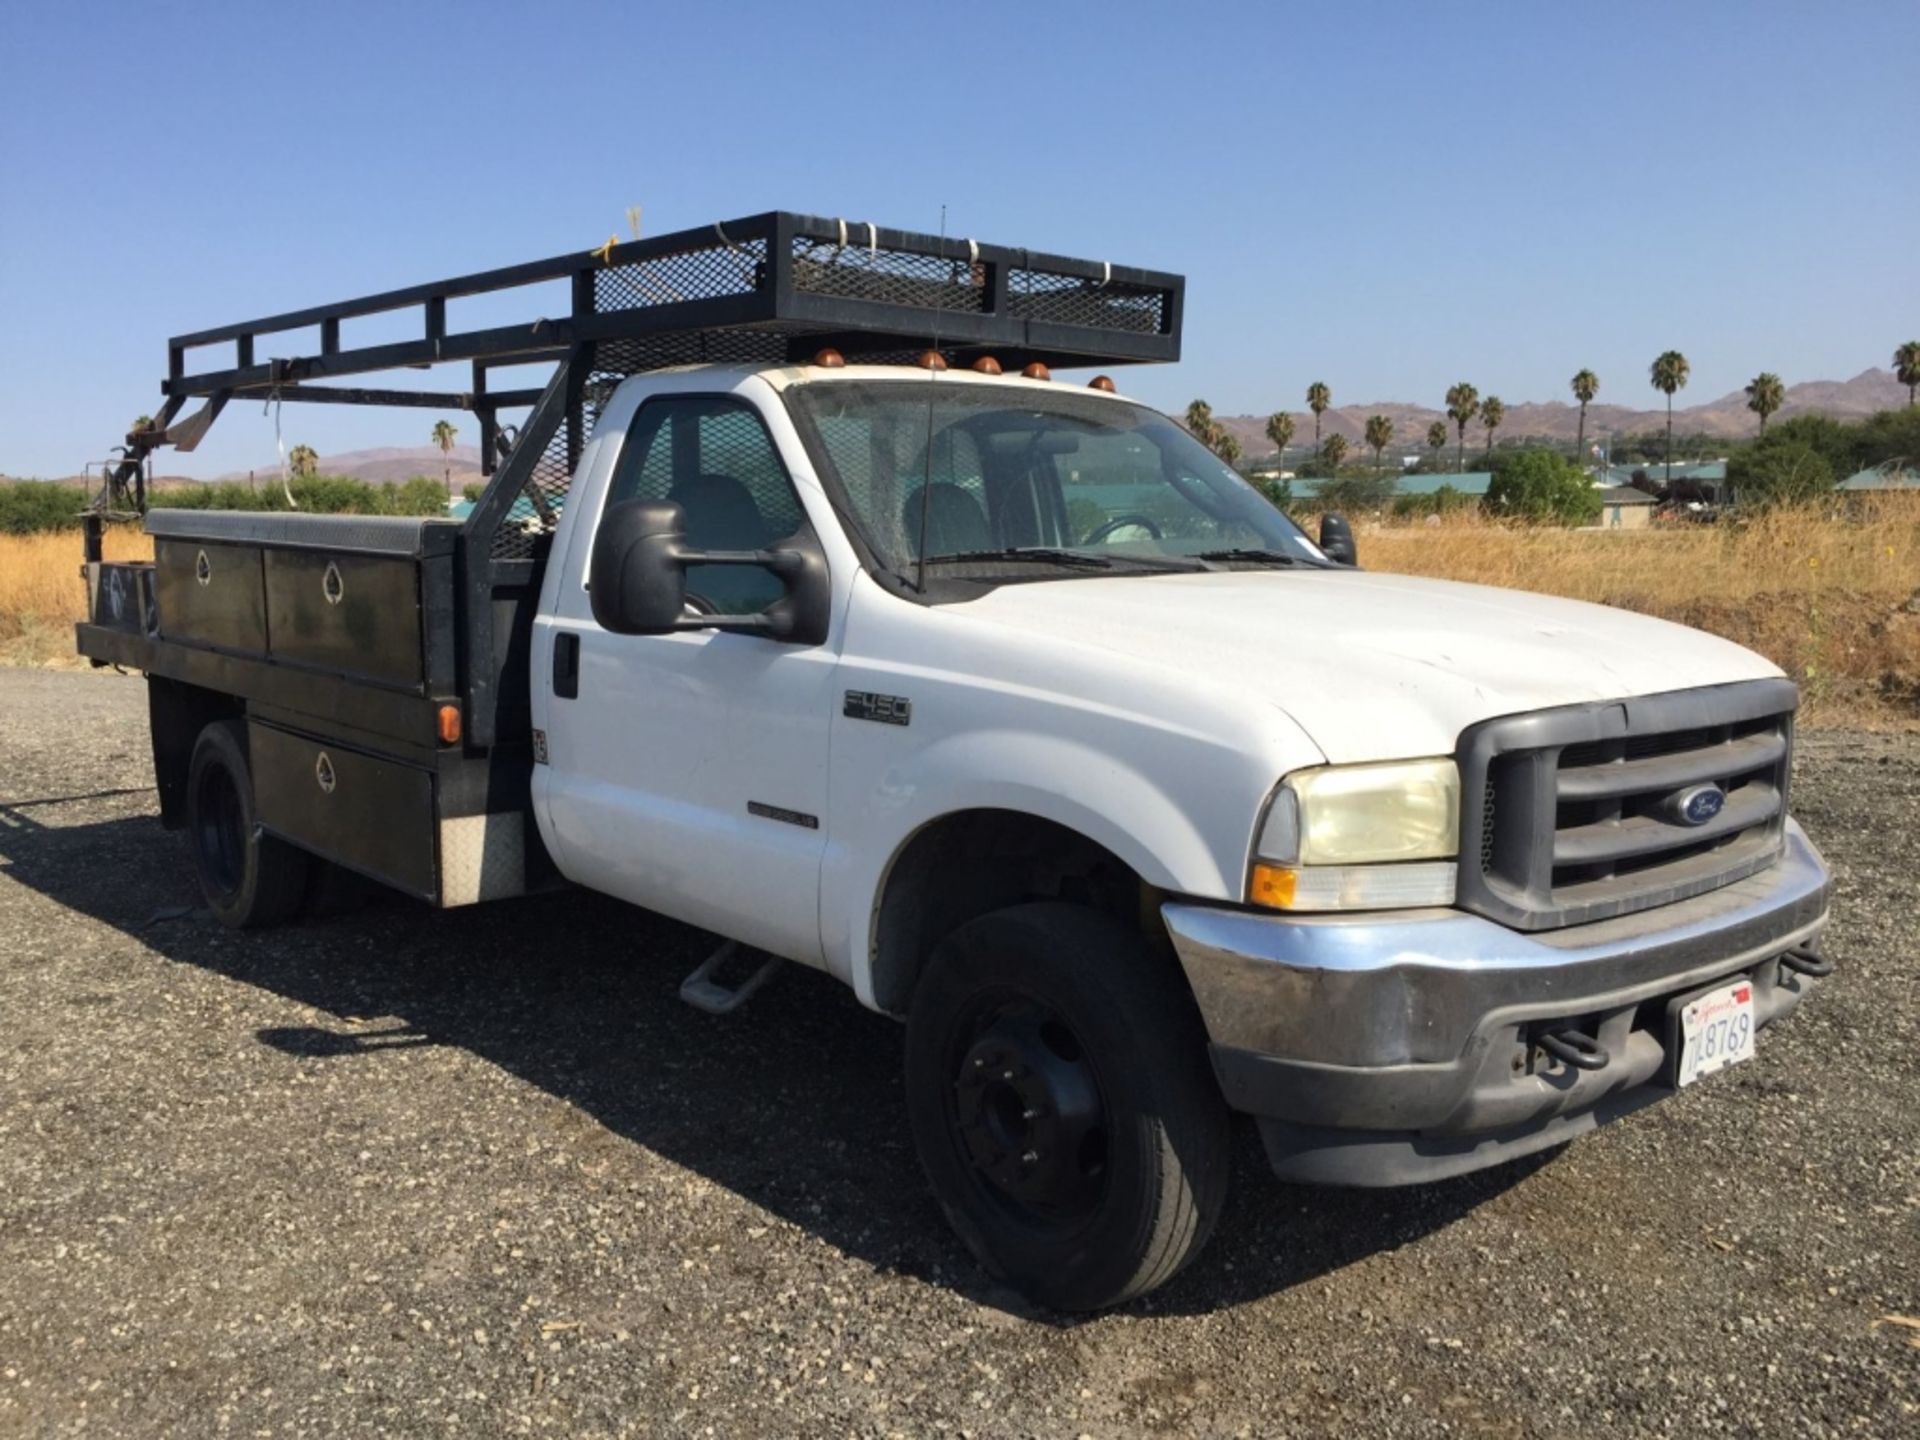 Ford F450 Flatbed Truck, - Image 2 of 44